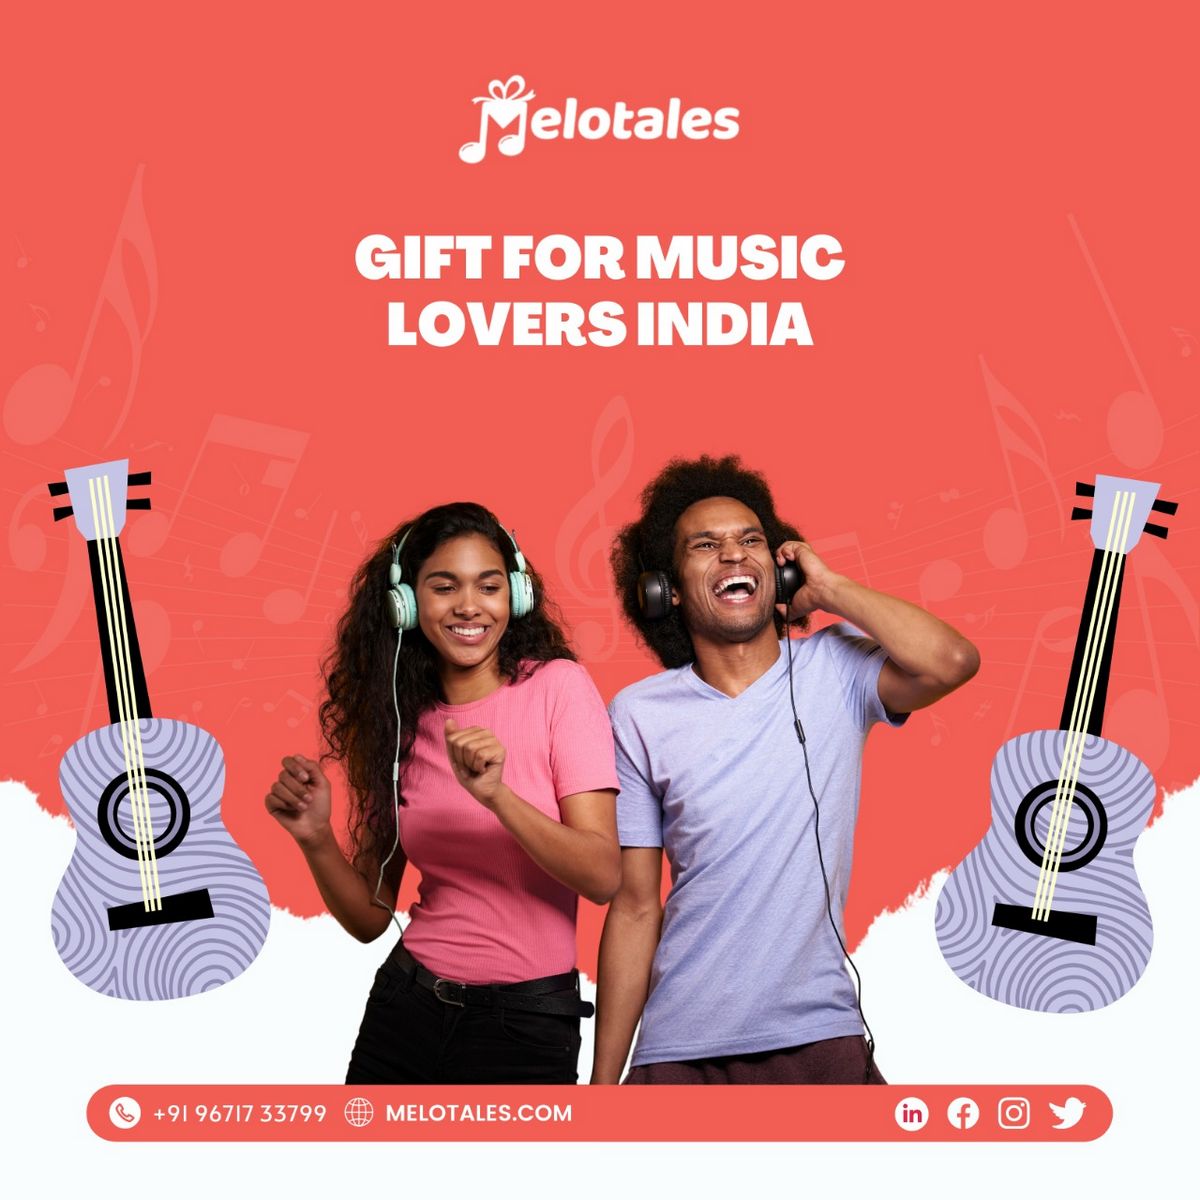 Best Musical Gifts | Musical Gifts For Music Lovers In India